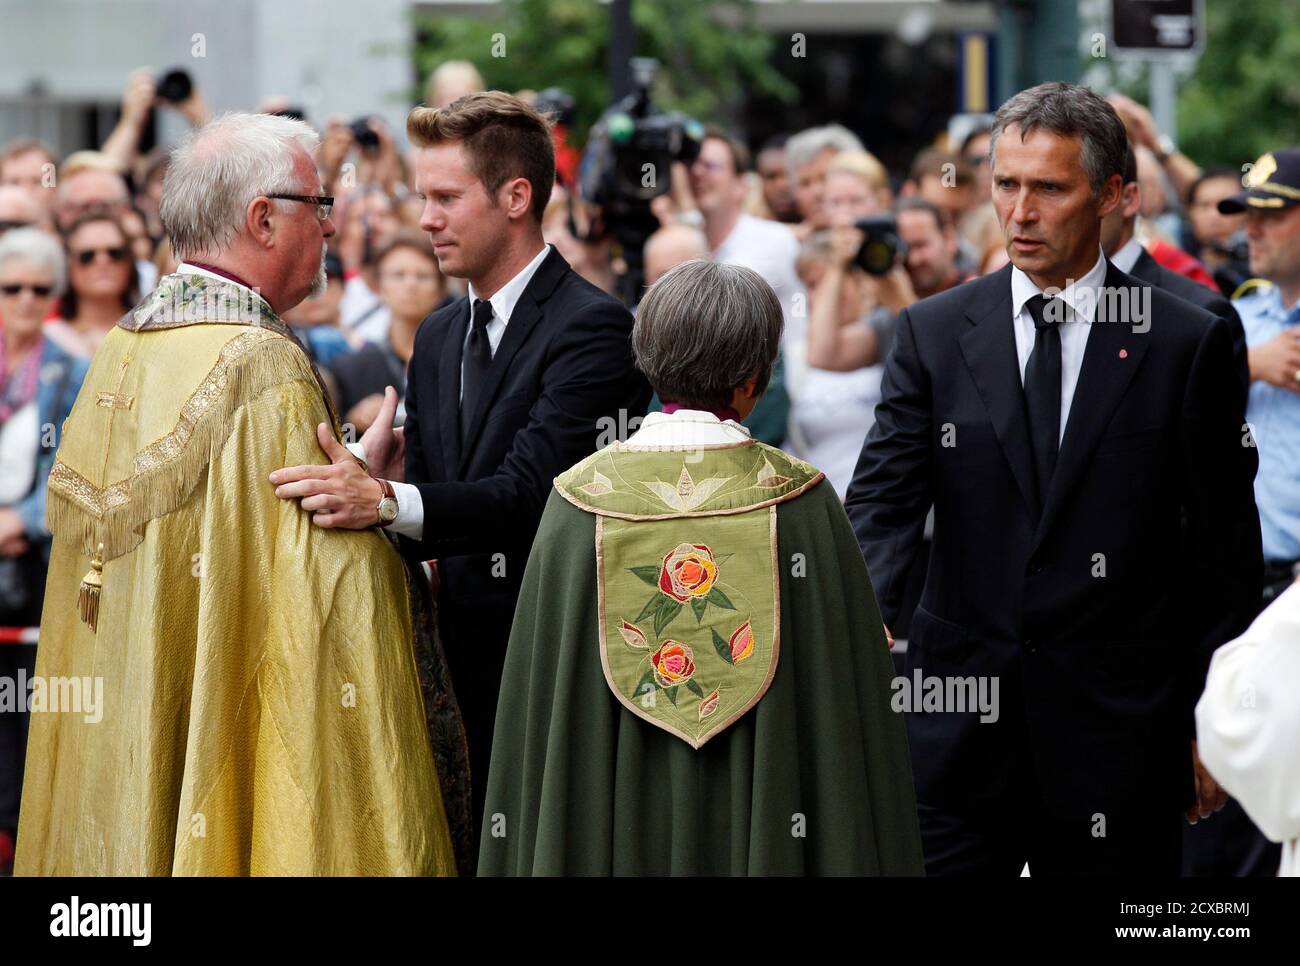 Norwegian Prime Minister Jens Stoltenberg (R) and Eskil Pedersen (2nd L), the leader of the youth wing of ruling Labour Party, are comforted by priests after a memorial service at a cathedral in Oslo, July 24, 2011.At least 92 people are dead after a gunman dressed in police uniform opened fire at a youth camp of Norway's ruling political party on Friday hours after a bomb blast in the government district in the capital Oslo. REUTERS/Wolfgang Rattay (NORWAY - Tags: CIVIL UNREST CRIME LAW POLITICS RELIGION) Stock Photo